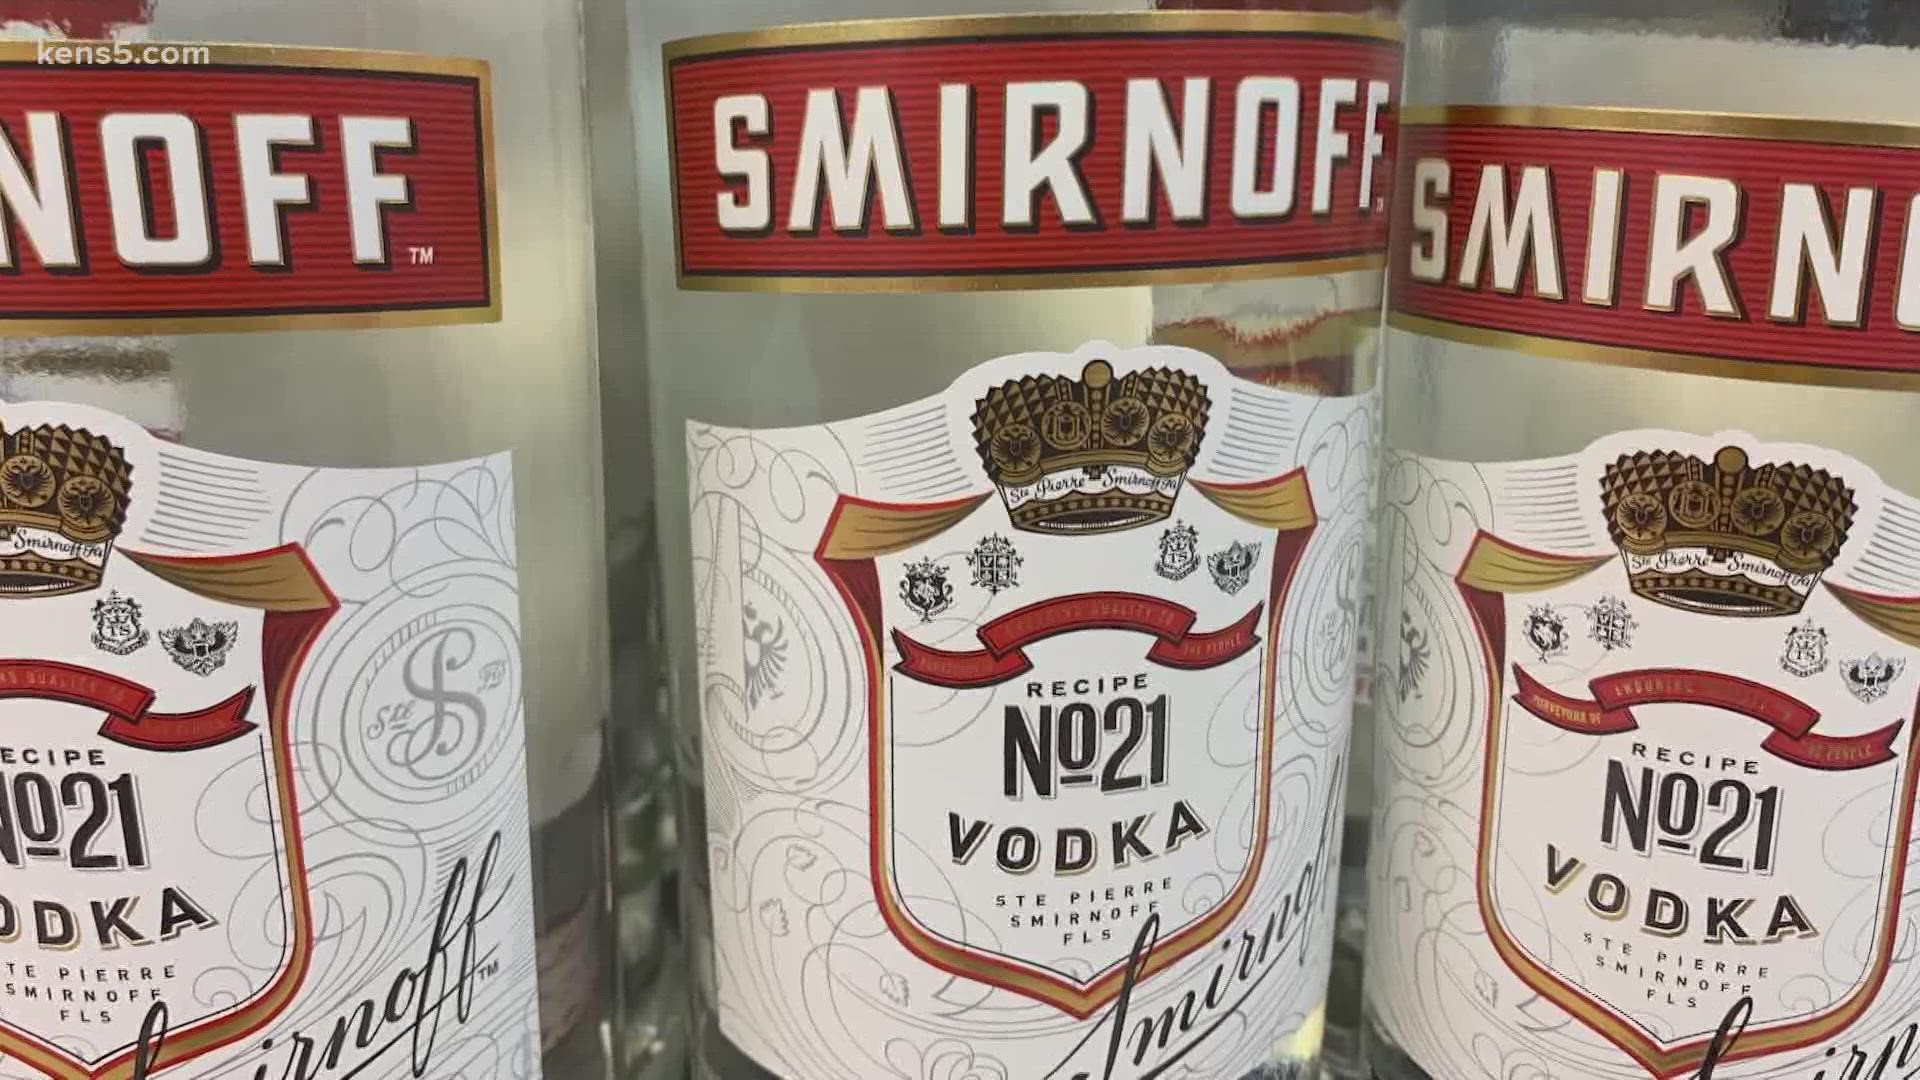 Most non-Russian vodka uses the labels as a marketing ploy